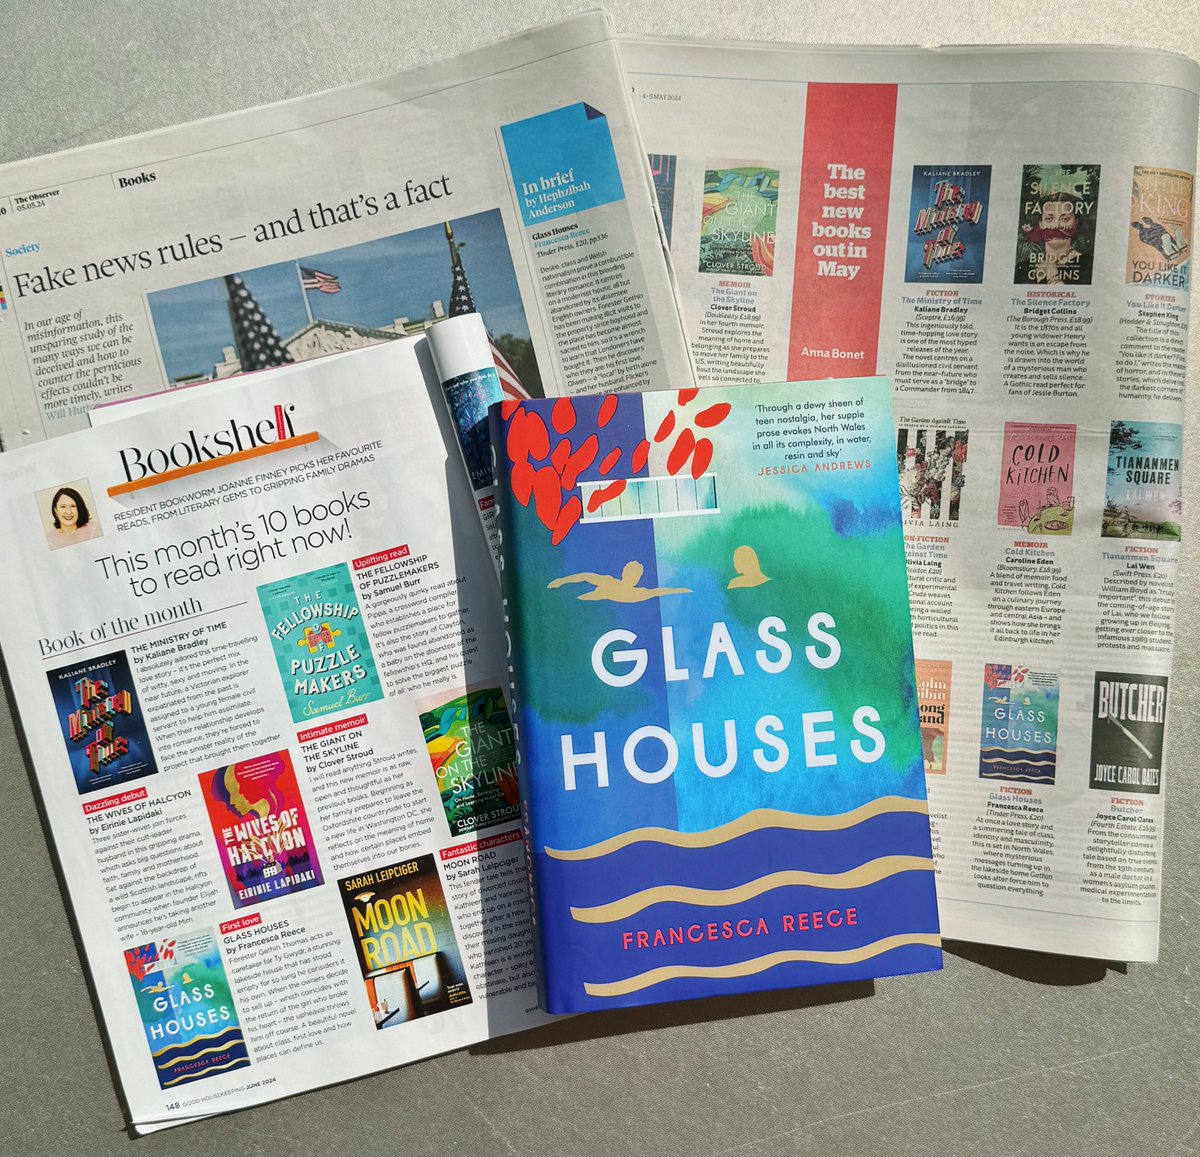 some ace quotes coming in for @FrancescaReece’s second novel, Glass Houses 💧 ‘a beautiful novel’ - @goodhousemag 🏴󠁧󠁢󠁷󠁬󠁳󠁿 ‘desire, class and Welsh nationalism prove a combustible combination in this brooding literary romance’ - @ObserverUK 🔥‘a simmering tale of class’ - @theipaper